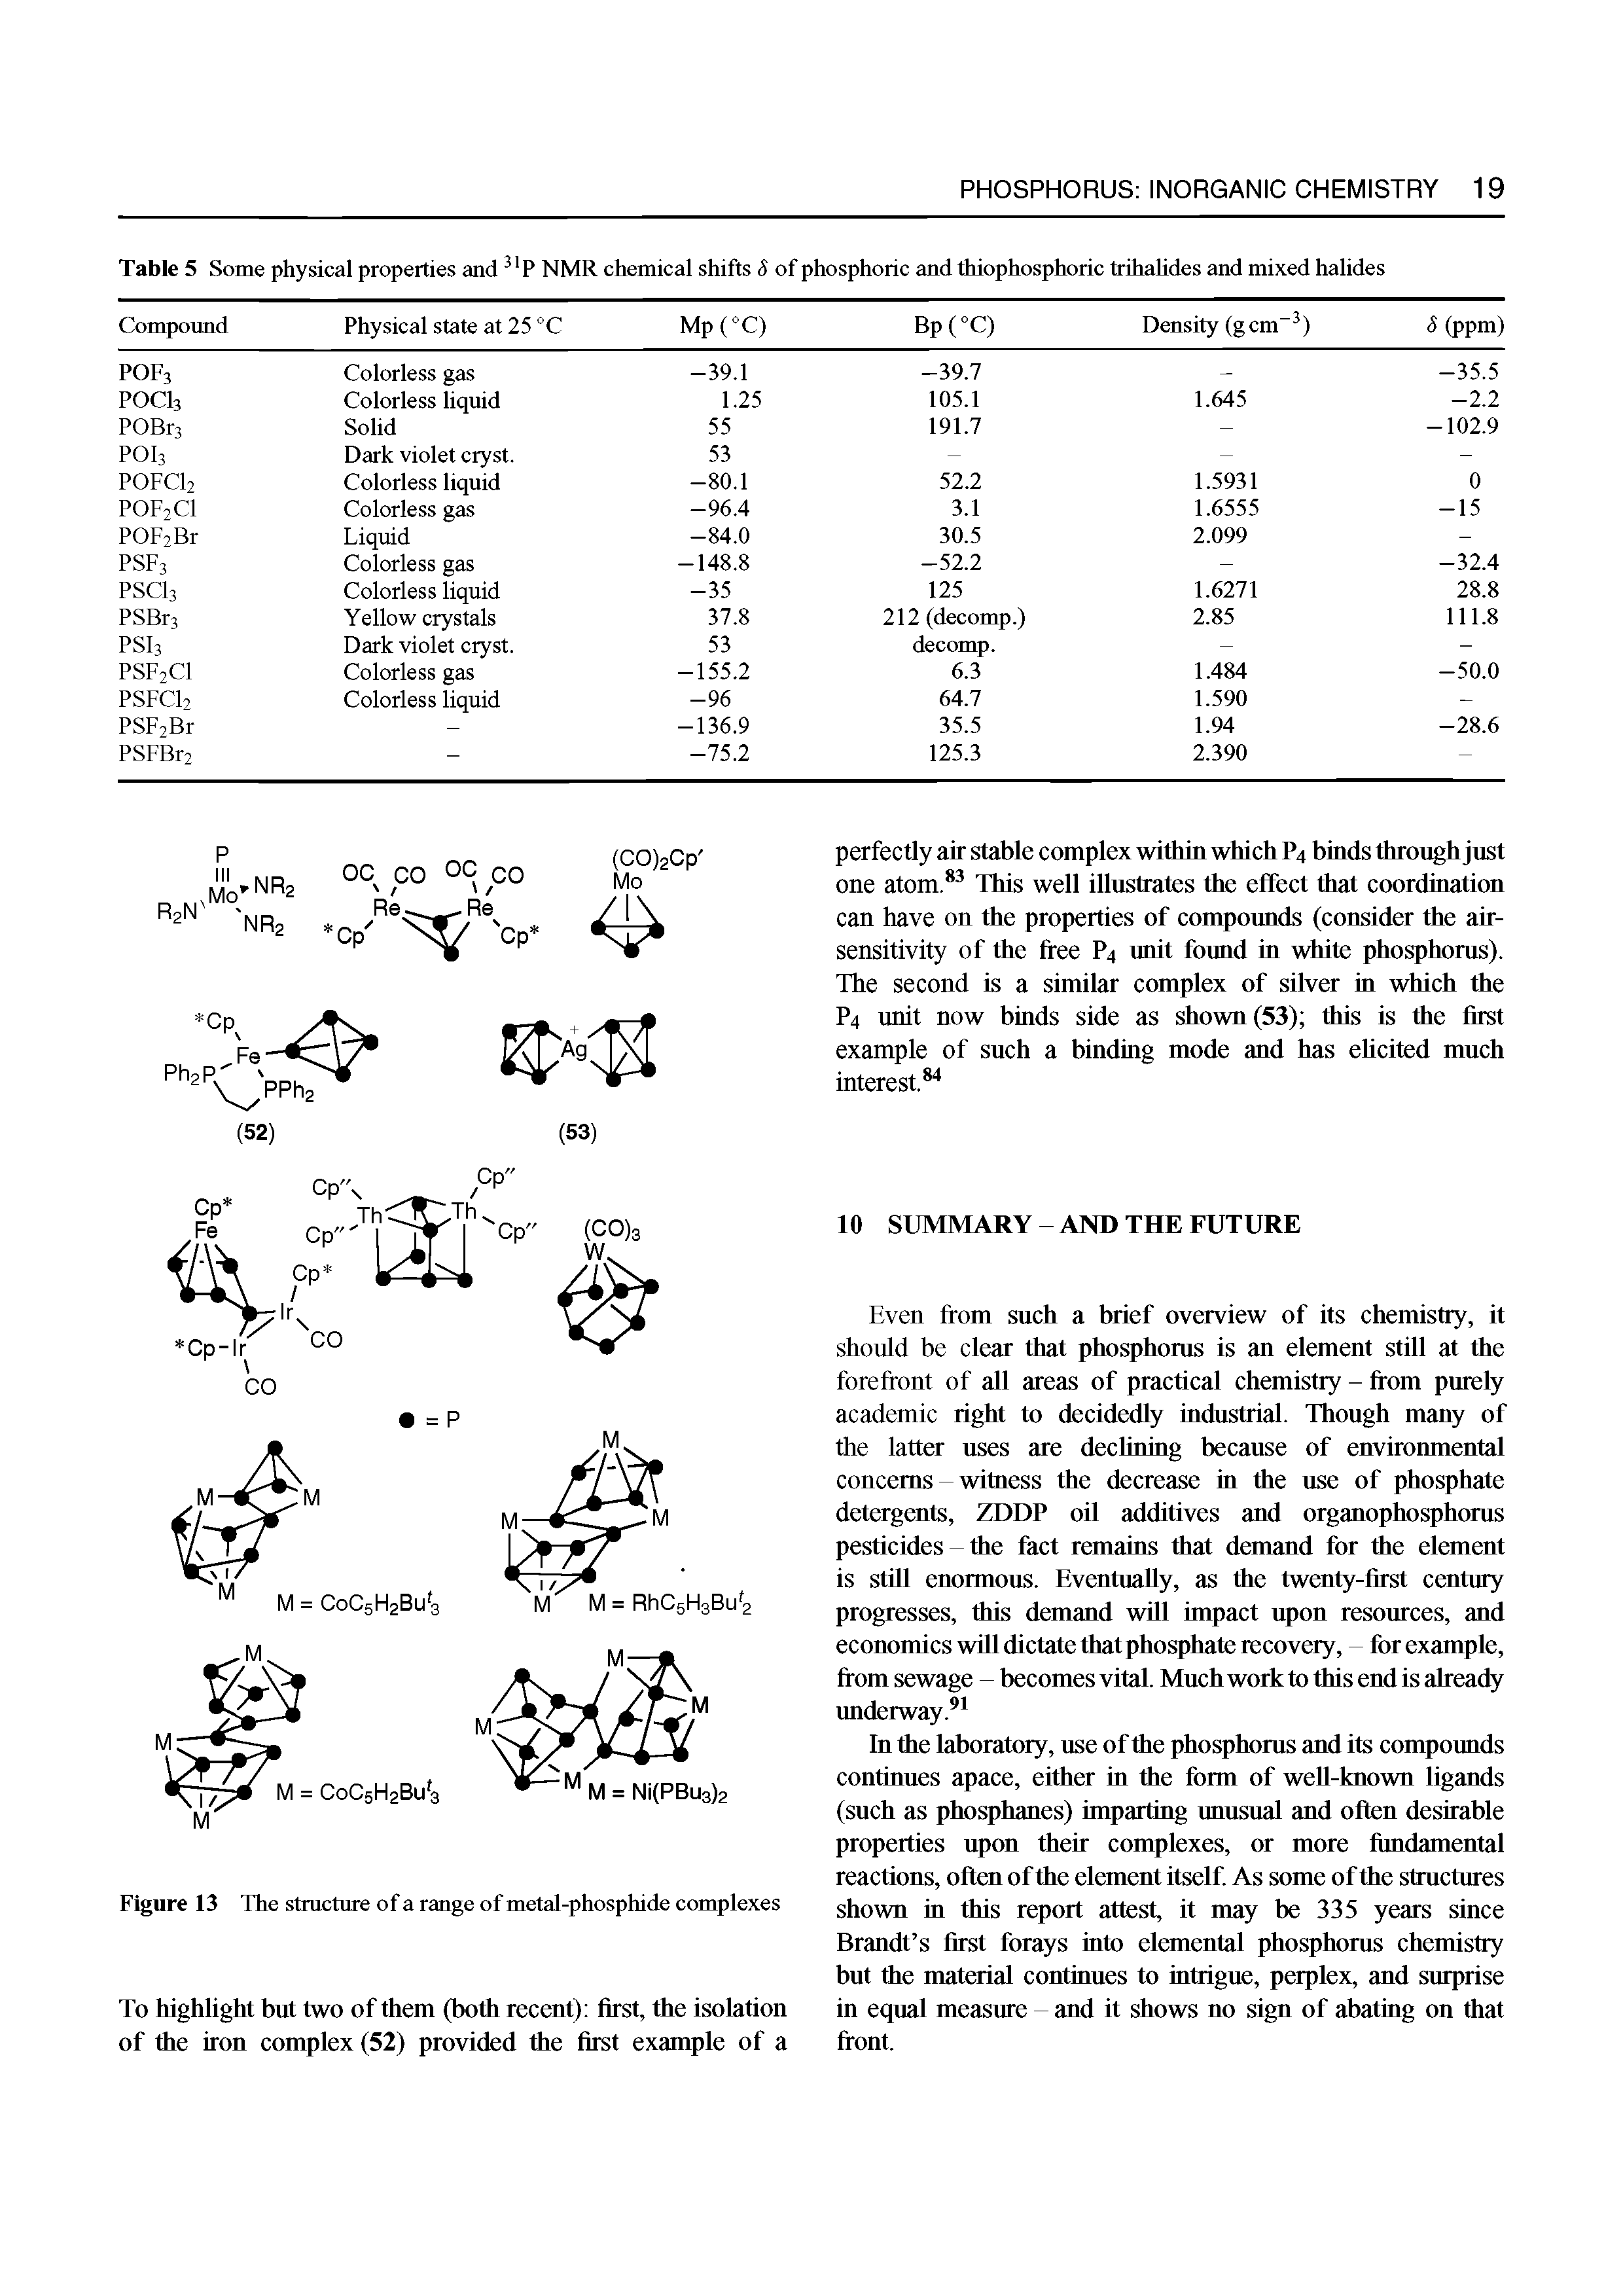 Figure 13 The structure of a range of metal-phosphide complexes...